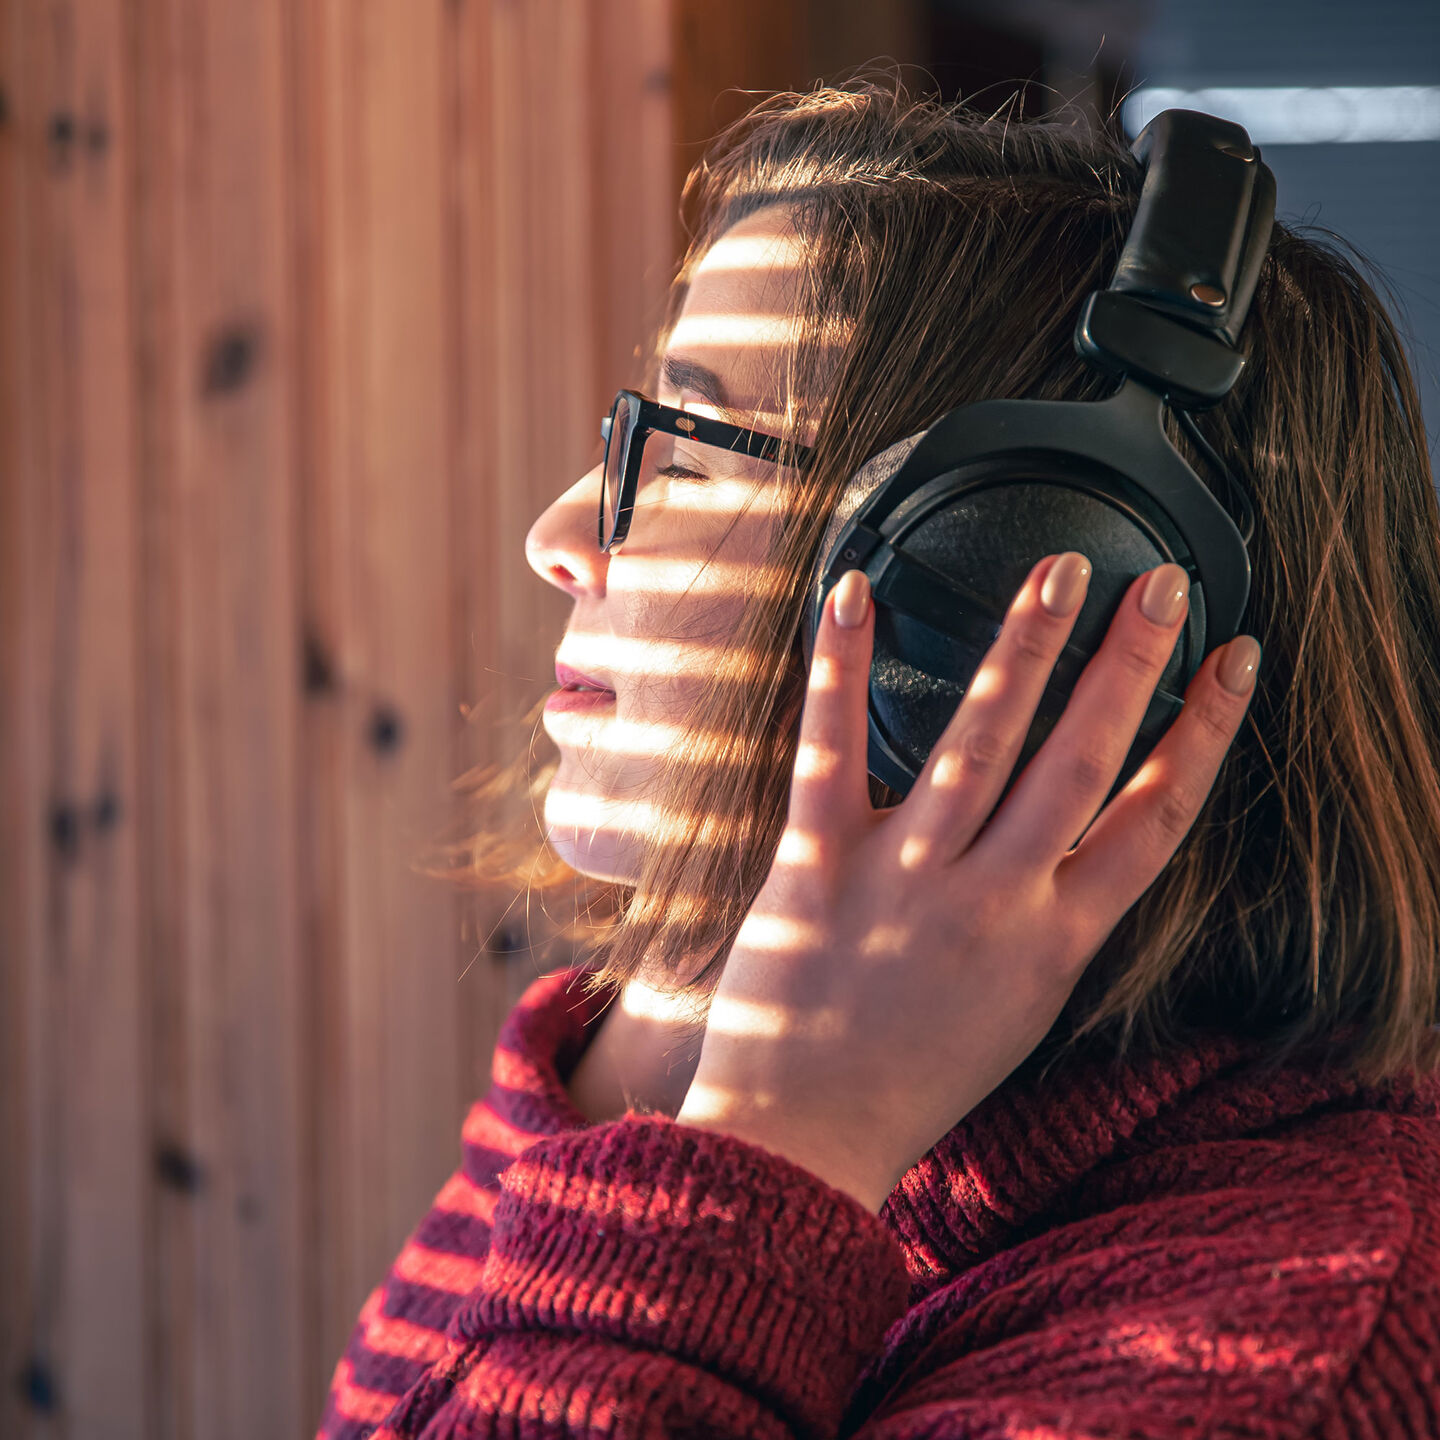 A woman in a red sweater wearing black headphones. Her hand are on the headphones.